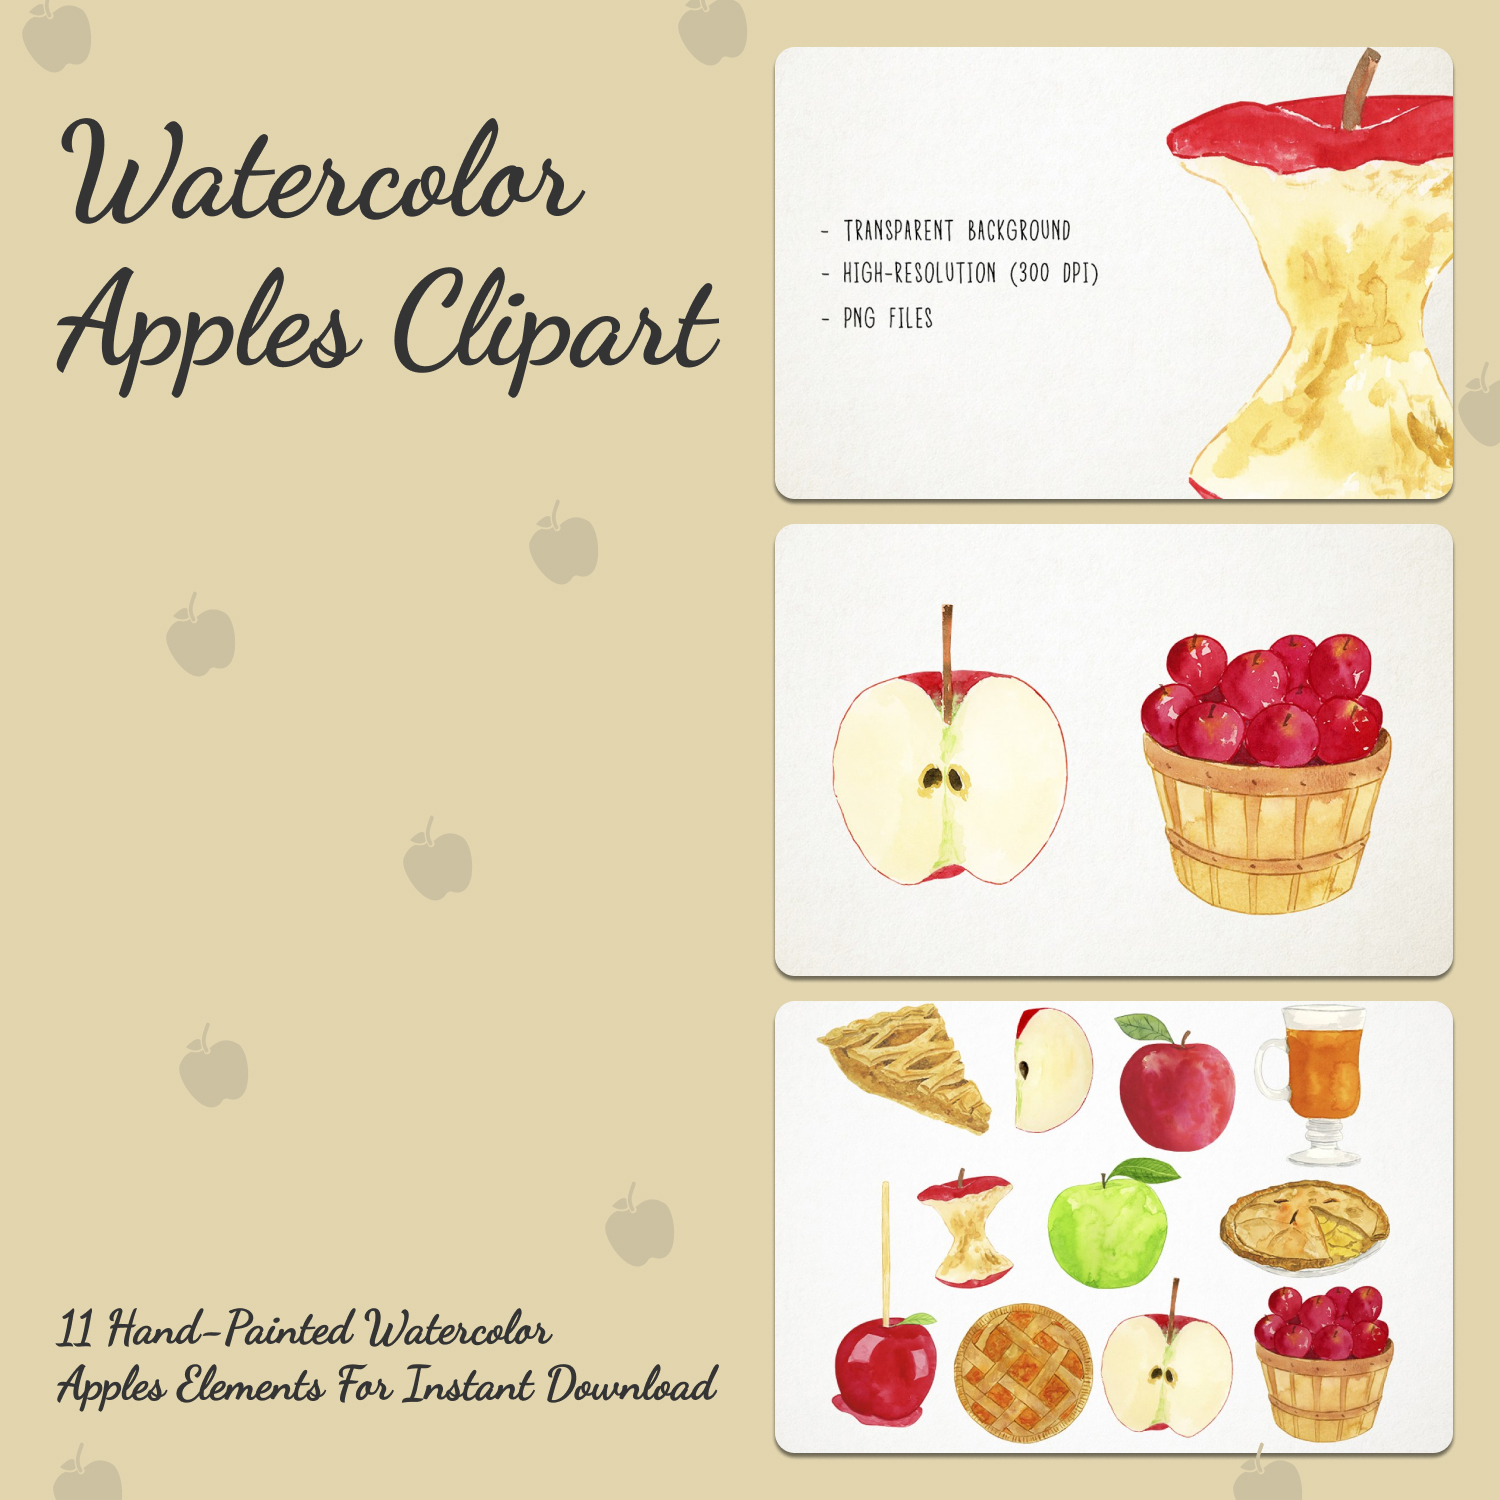 Watercolor apples clipart preview.